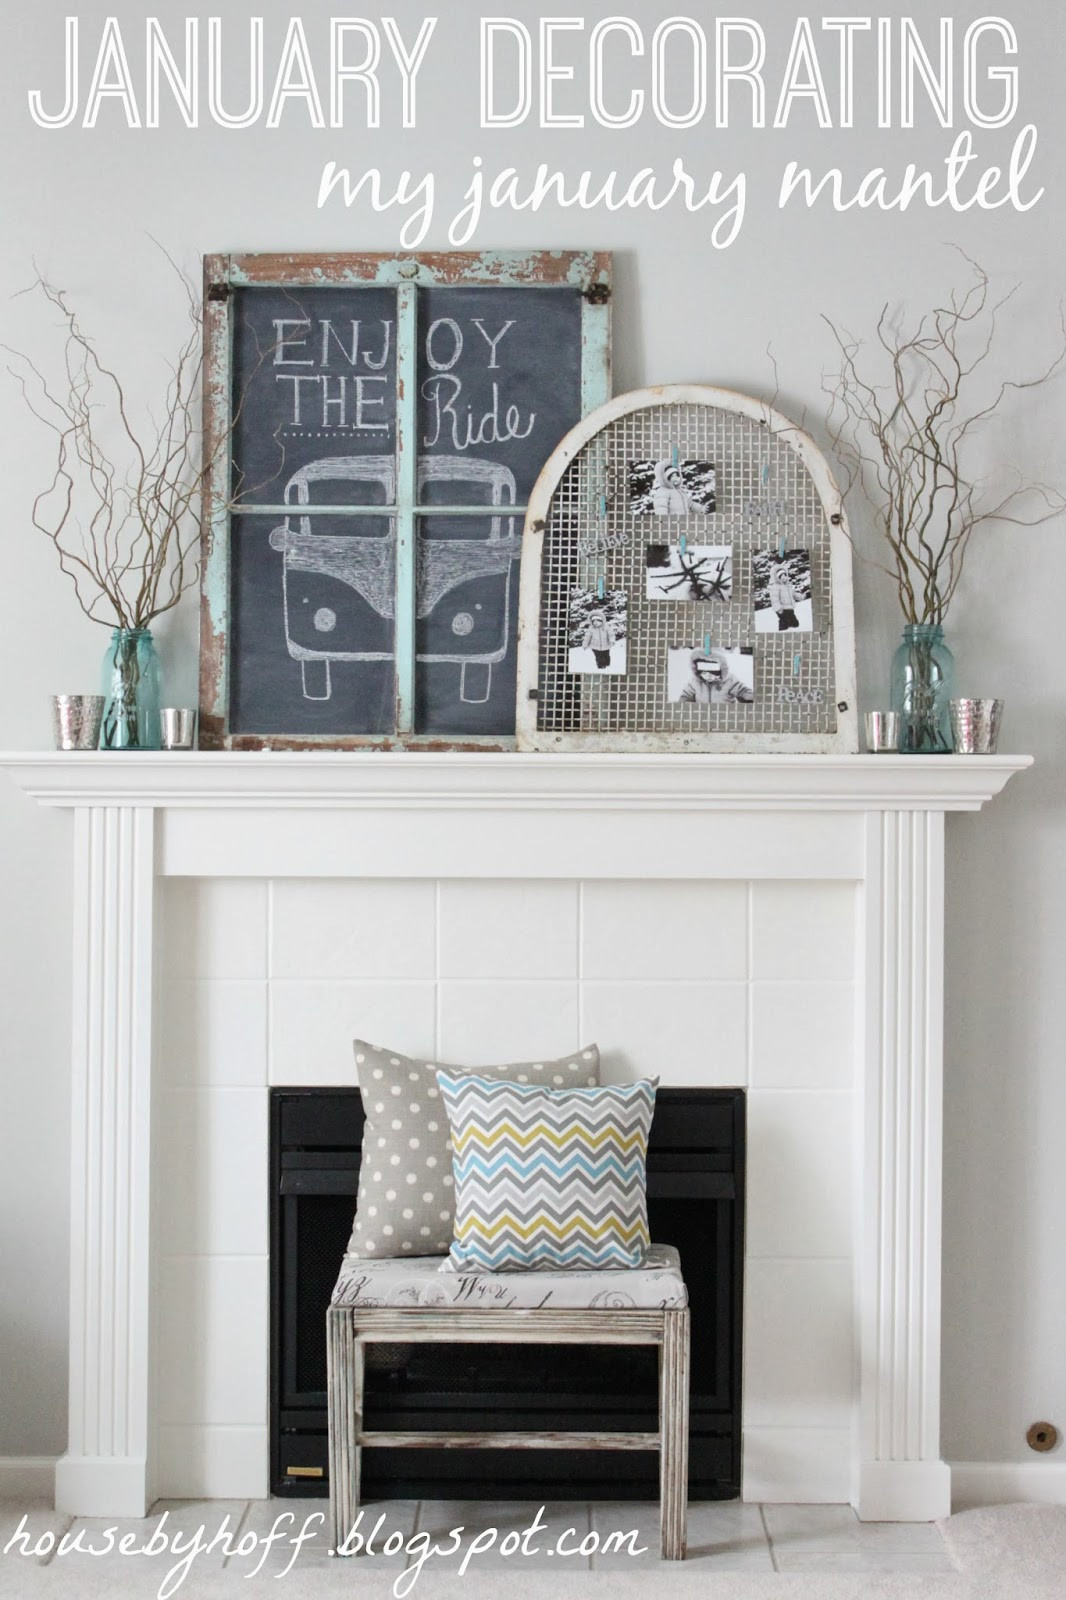 January Home Decorating Ideas
 Decorating in January The Hardest Month of the Year to